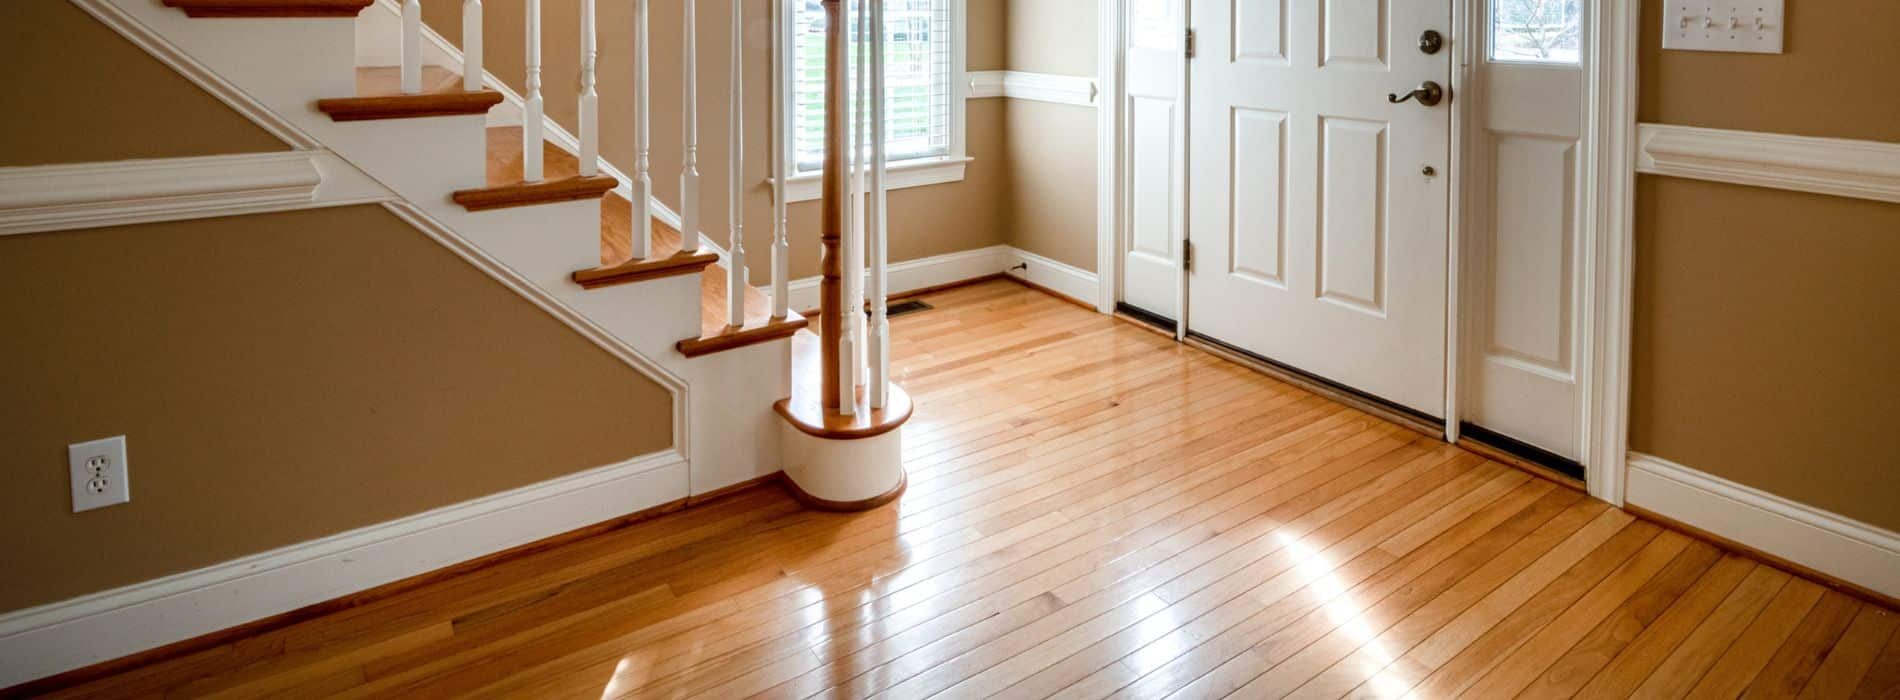 A gleaming wooden floor is within reach, as a powerful polishing machine glides effortlessly across its surface, leaving behind a smooth, polished finish that shines with brilliance.